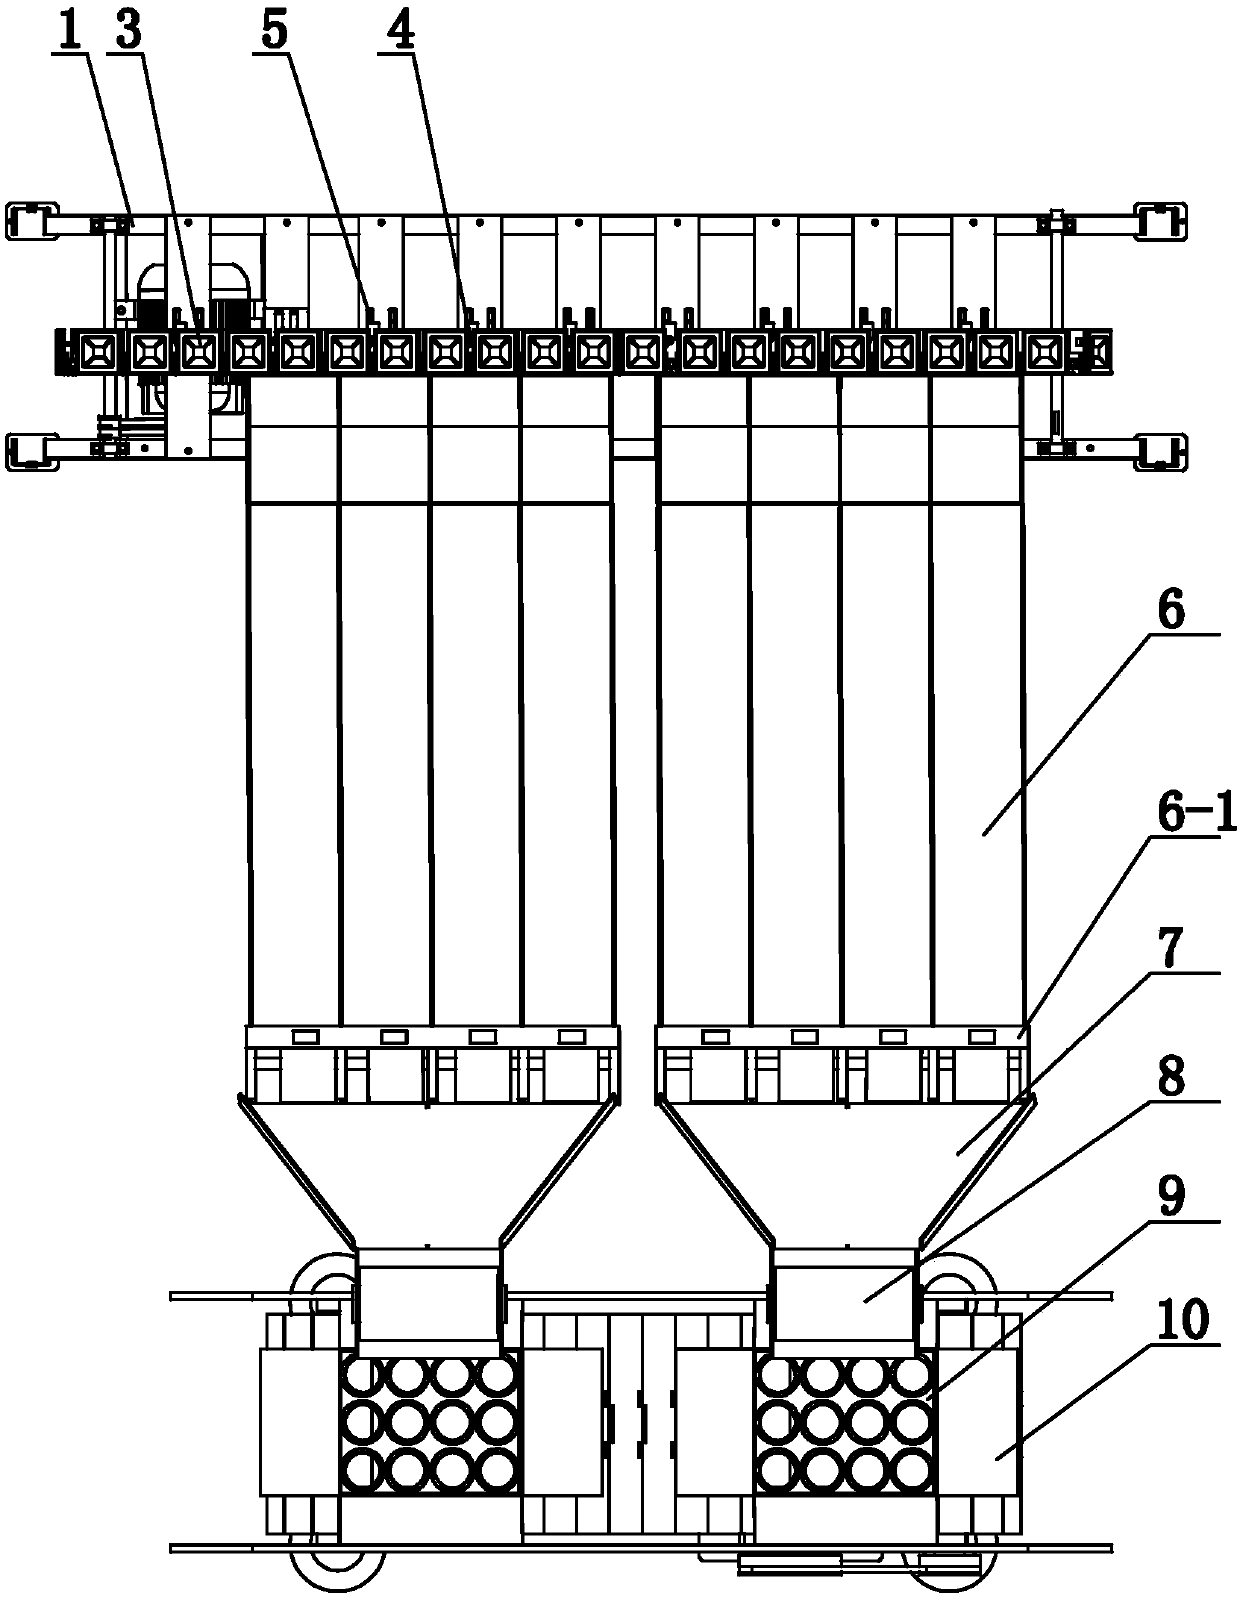 Automatic fruit classification and boxing machine